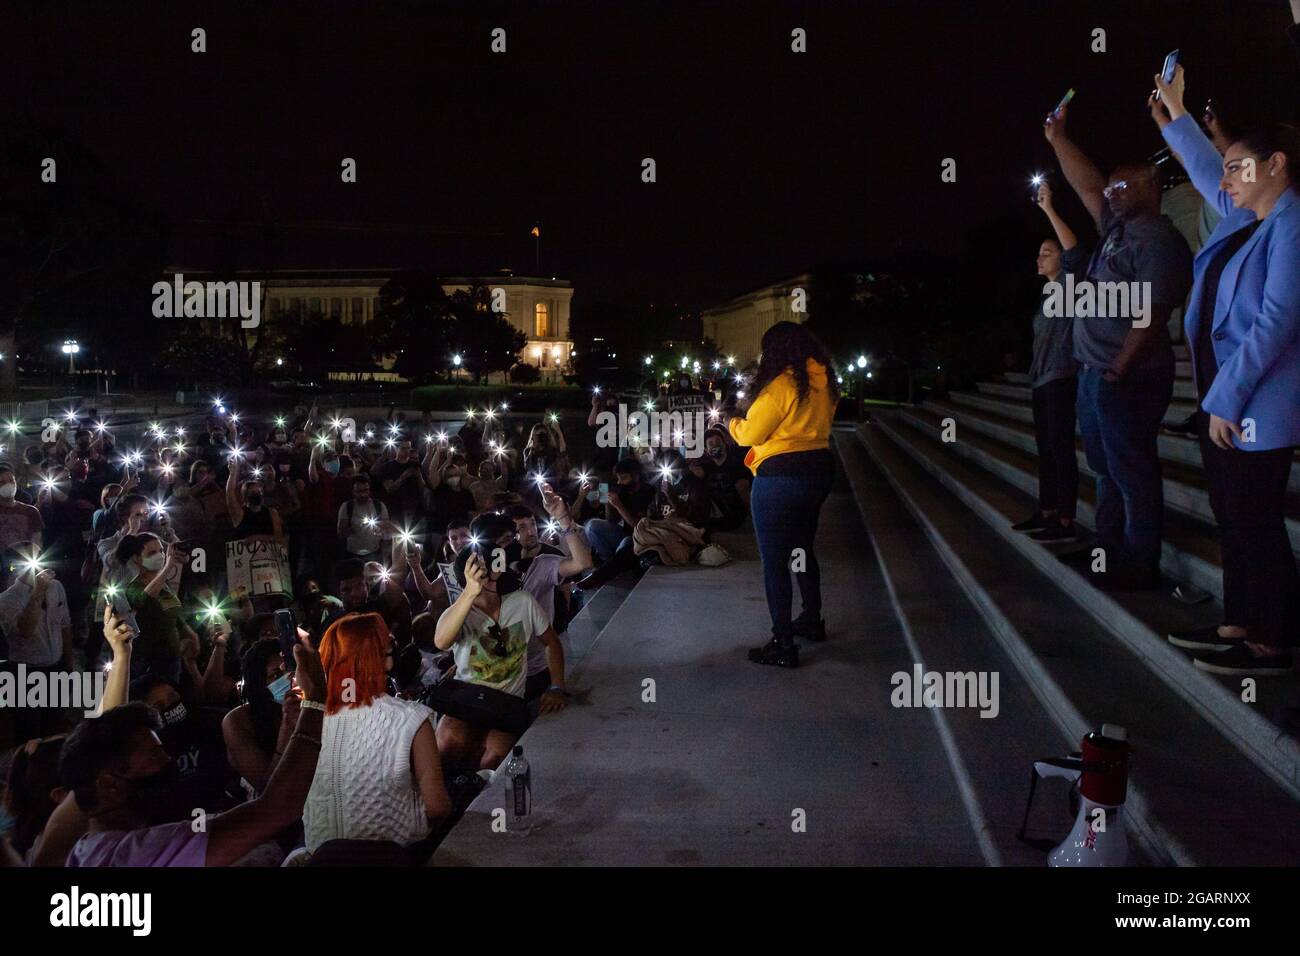 Washington, DC, USA. 1st Aug, 2021. Pictured: Protesters at a midnight rally on the steps of the Capitol hold their phones in the air at Congresswoman Cori Bush's (D-MO) request, in a moment of silence to remember those who have been lost due to homelessness and the pandemic. Representatives Alexandria Ocasio-Cortez (D-NY), Jamaal Bowman (D-NY), and Sara Jacobs (D-CA) stand behind her. Congresswoman Bush called the rally to protest the expiration of the eviction moratorium at midnight August 1. Credit: Allison Bailey/Alamy Live News Stock Photo